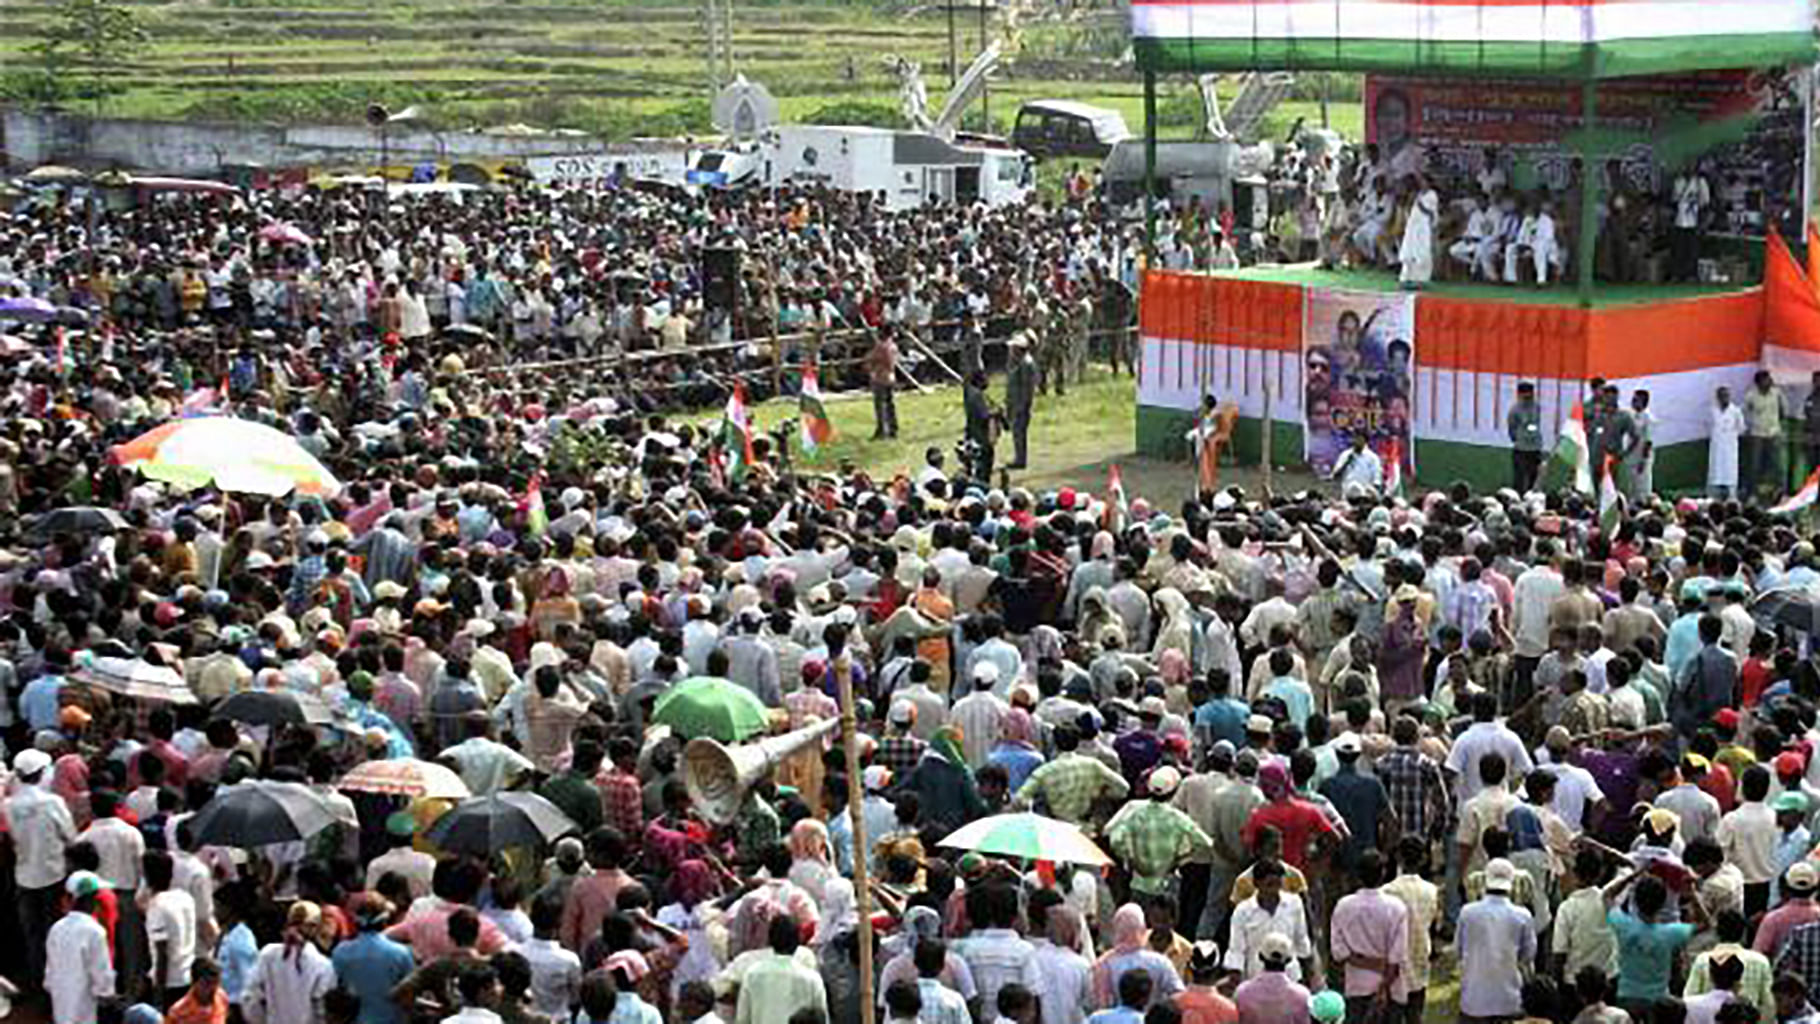 TMC chief Mamata Banerjee during the 2011 election rally at Jhargram
in West Bengal. (Photo: PTI)